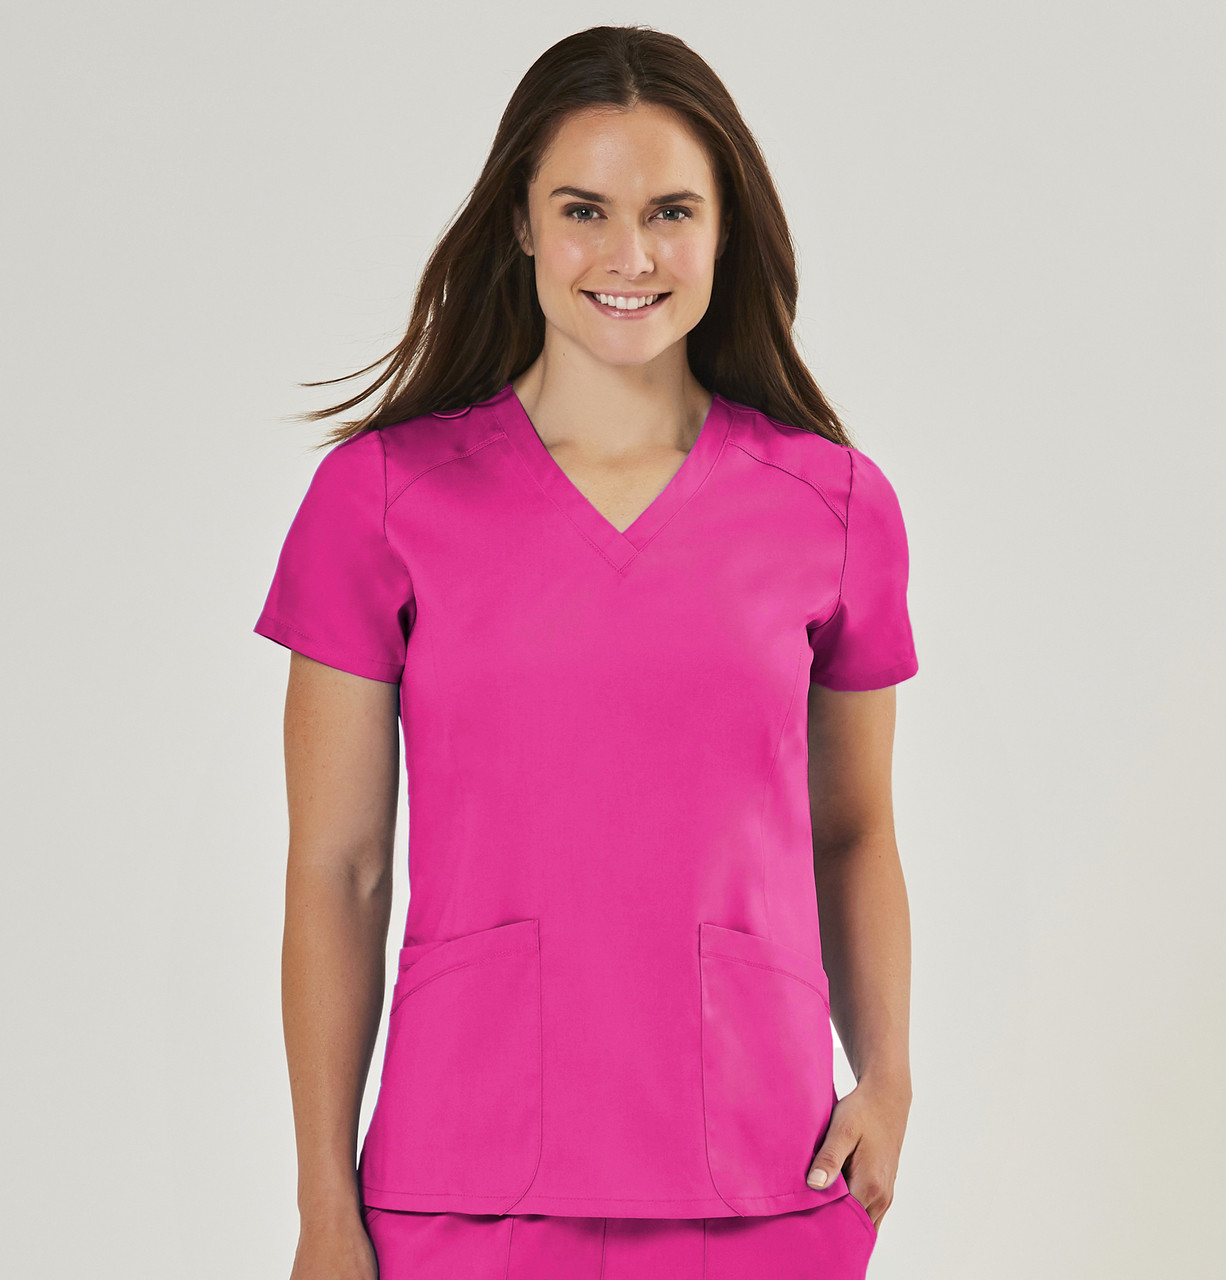 IRG Edge 2803 Scrub Top with Stretchy Sides